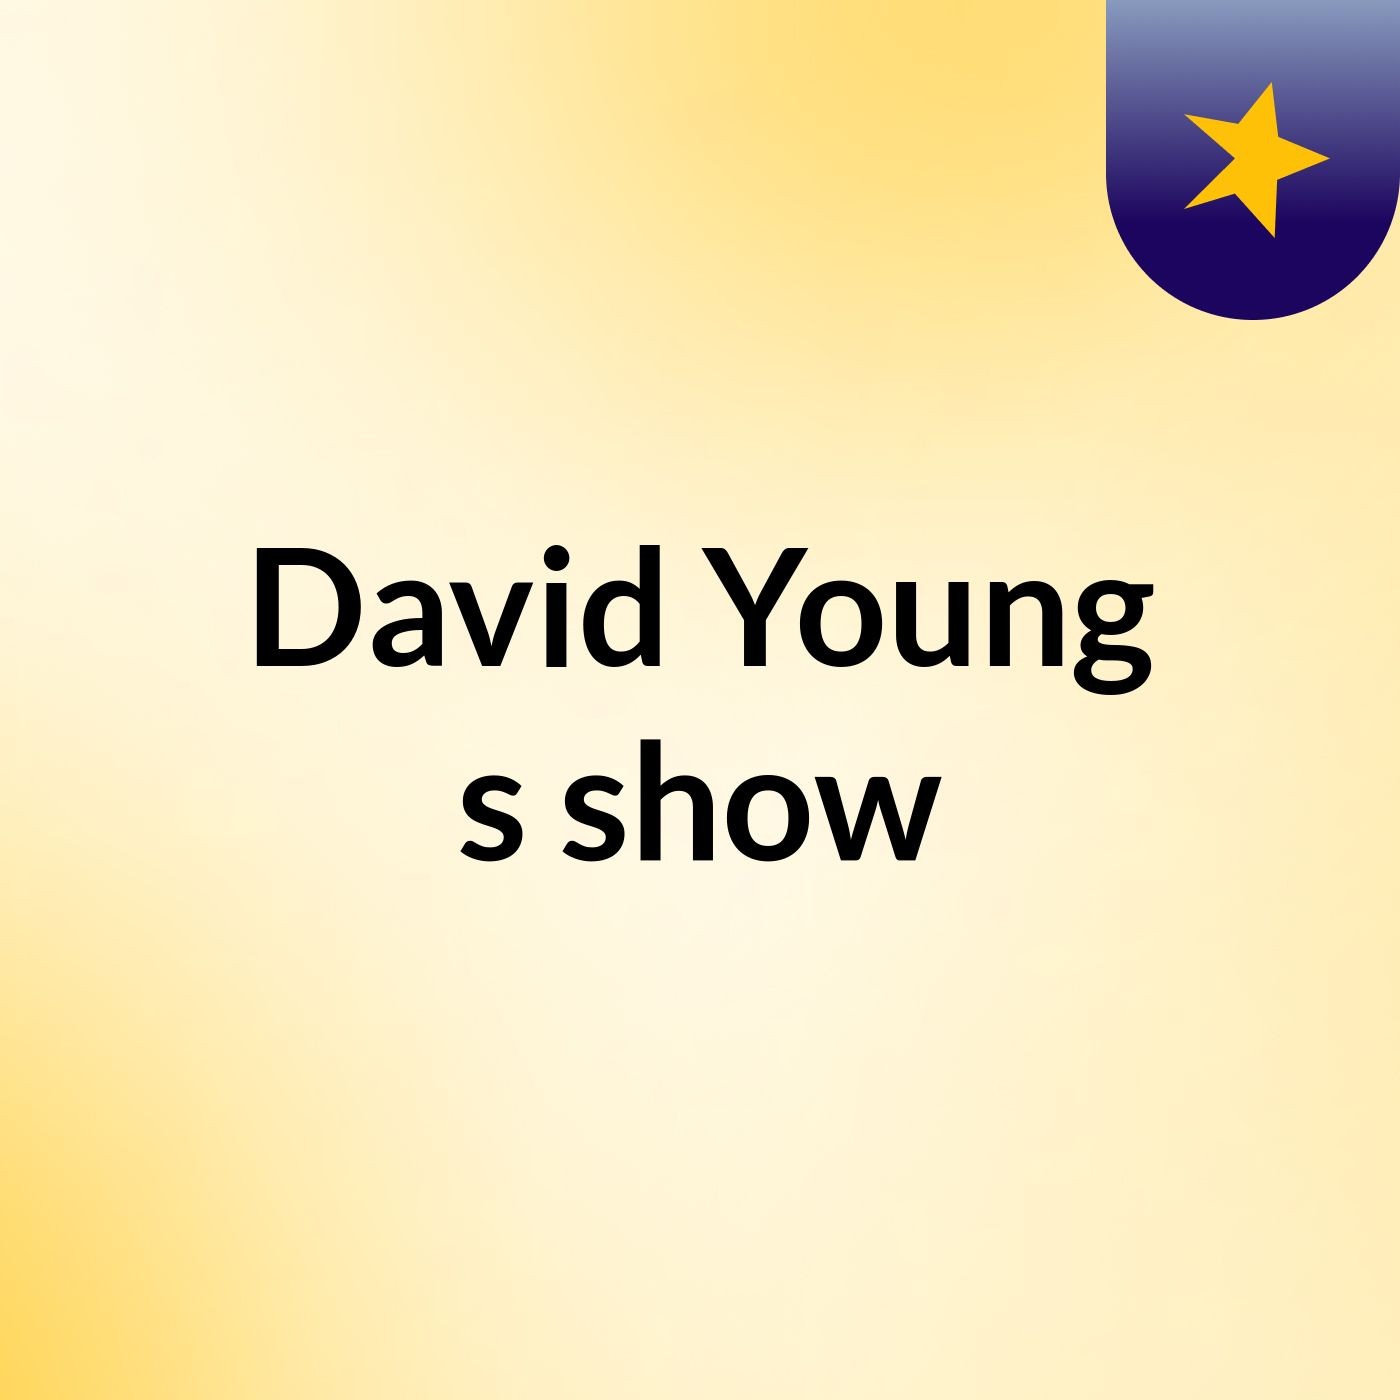 David Young's show